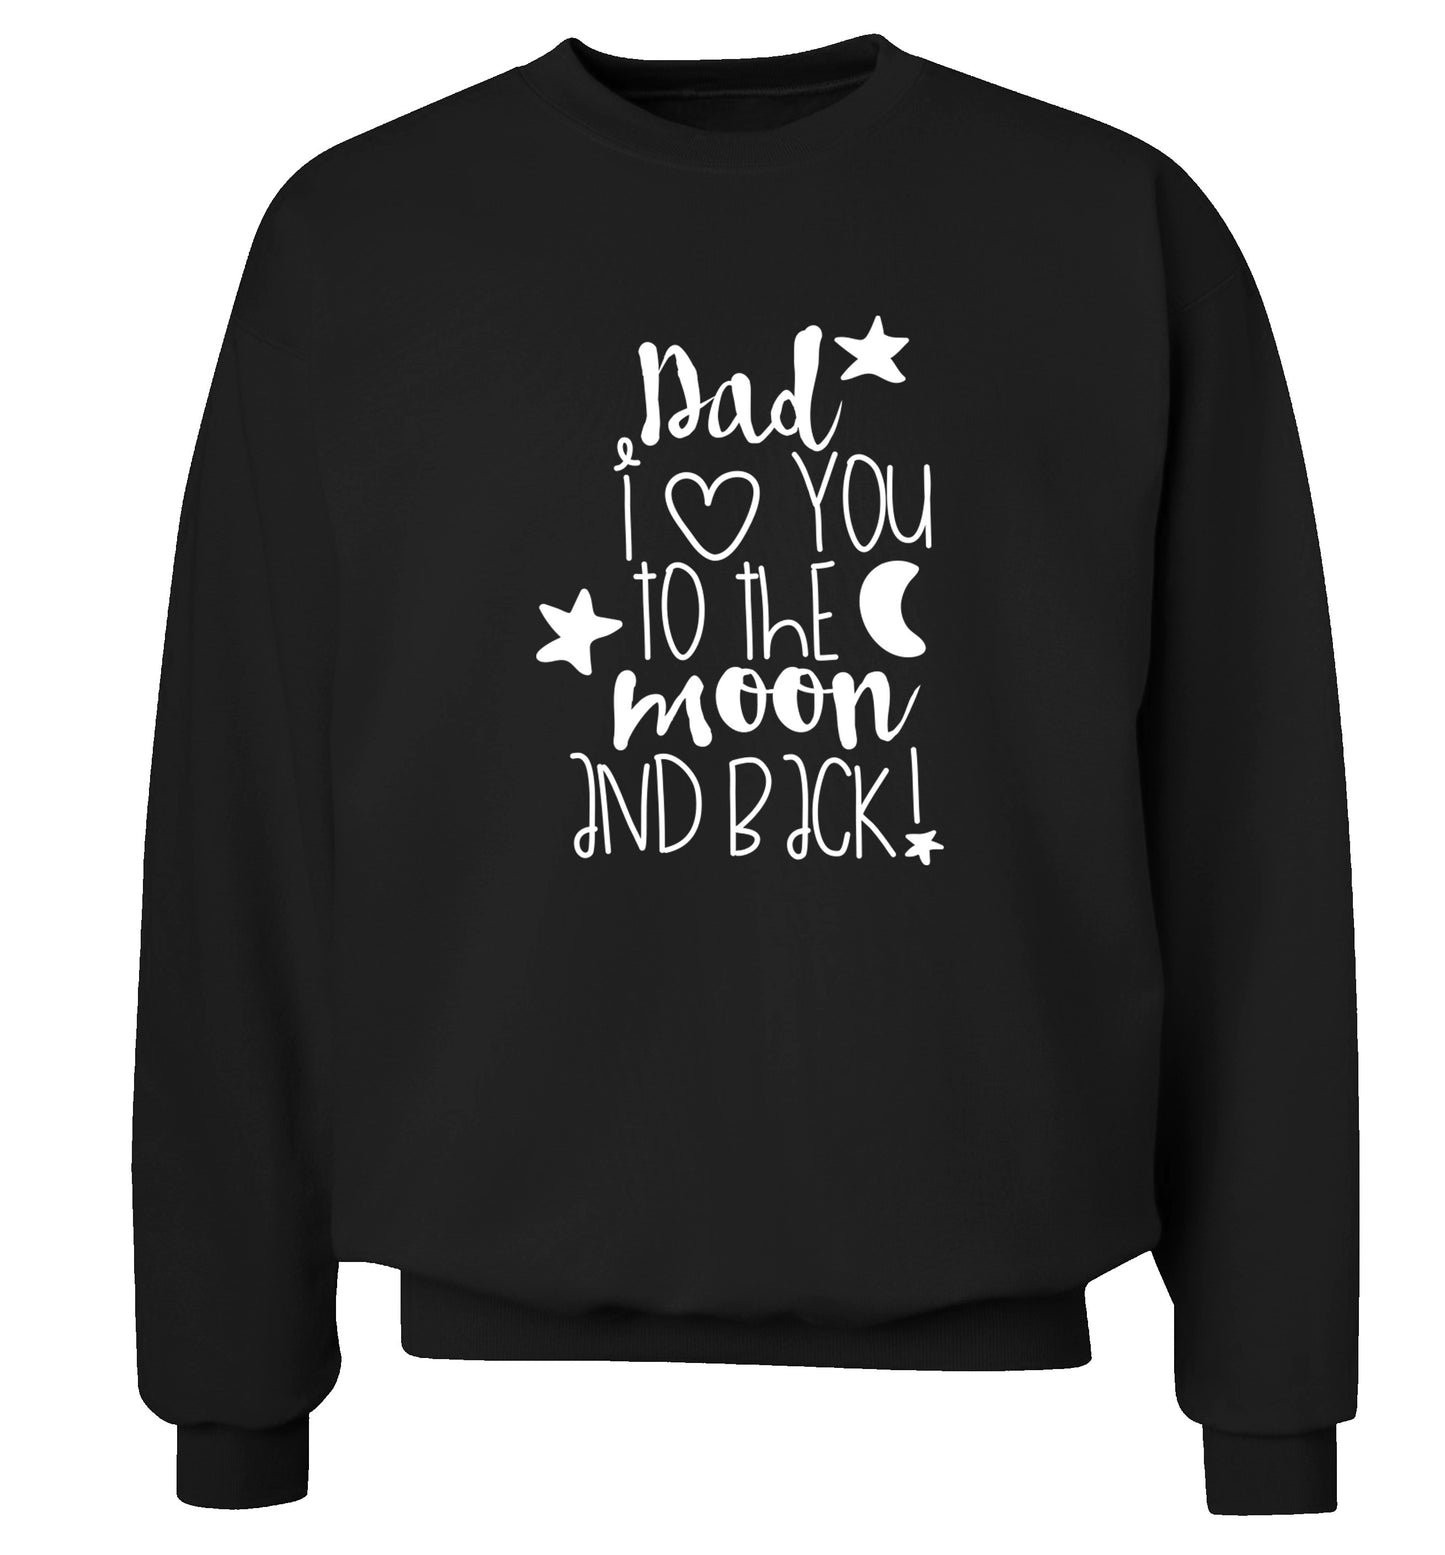 Dad I love you to the moon and back Adult's unisex black  sweater 2XL